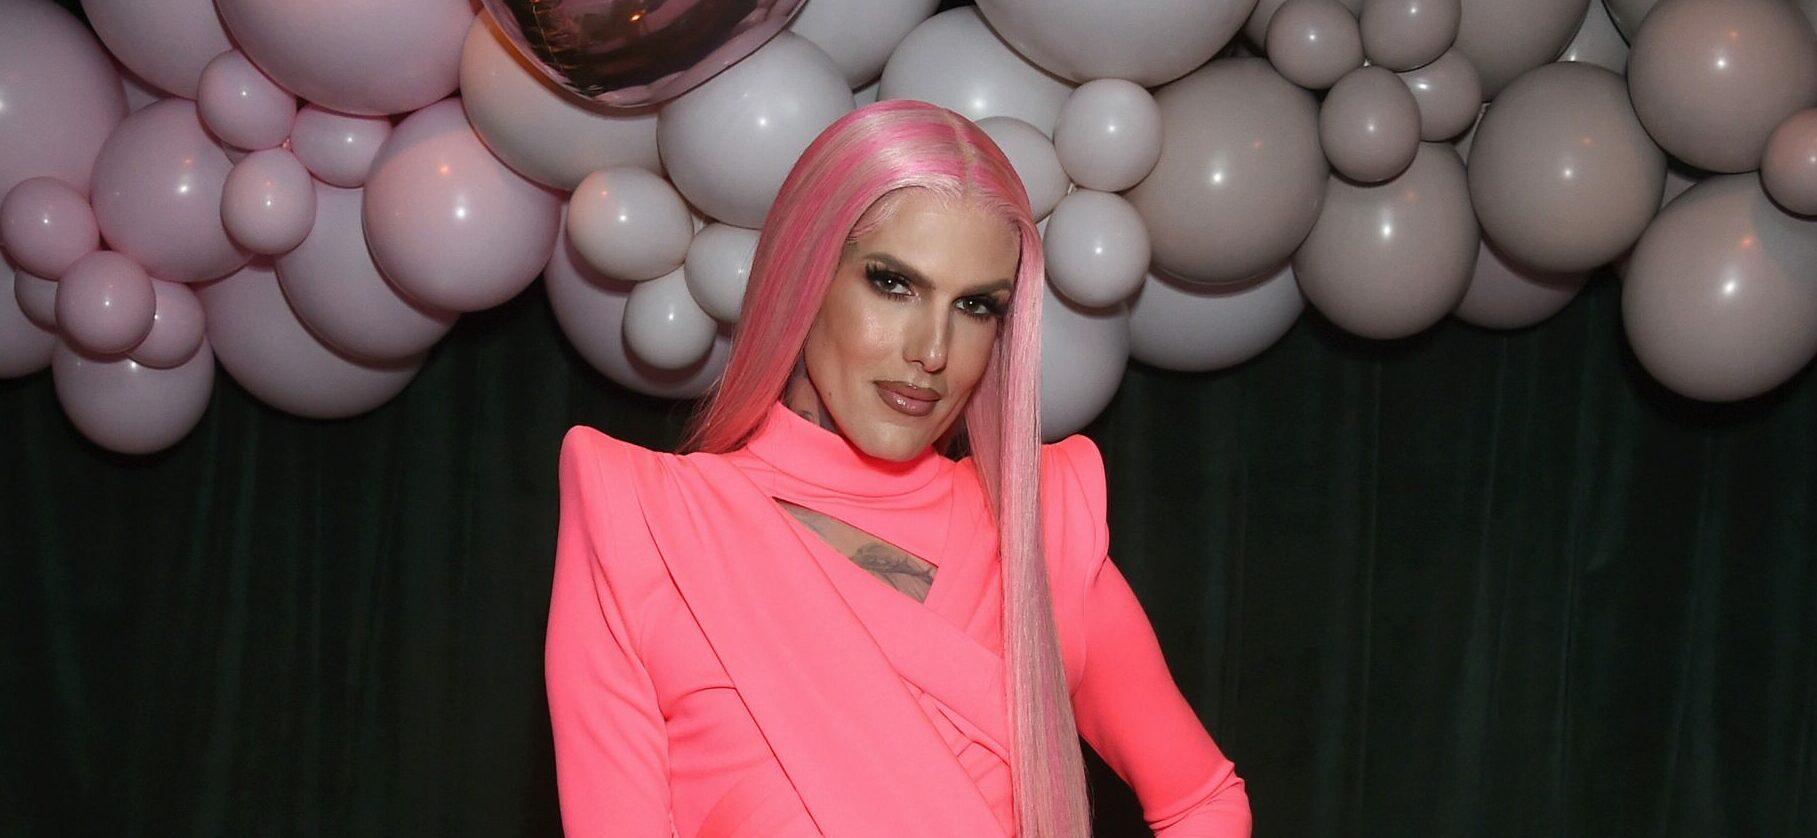 Jeffree Star at the Skin Launch Party